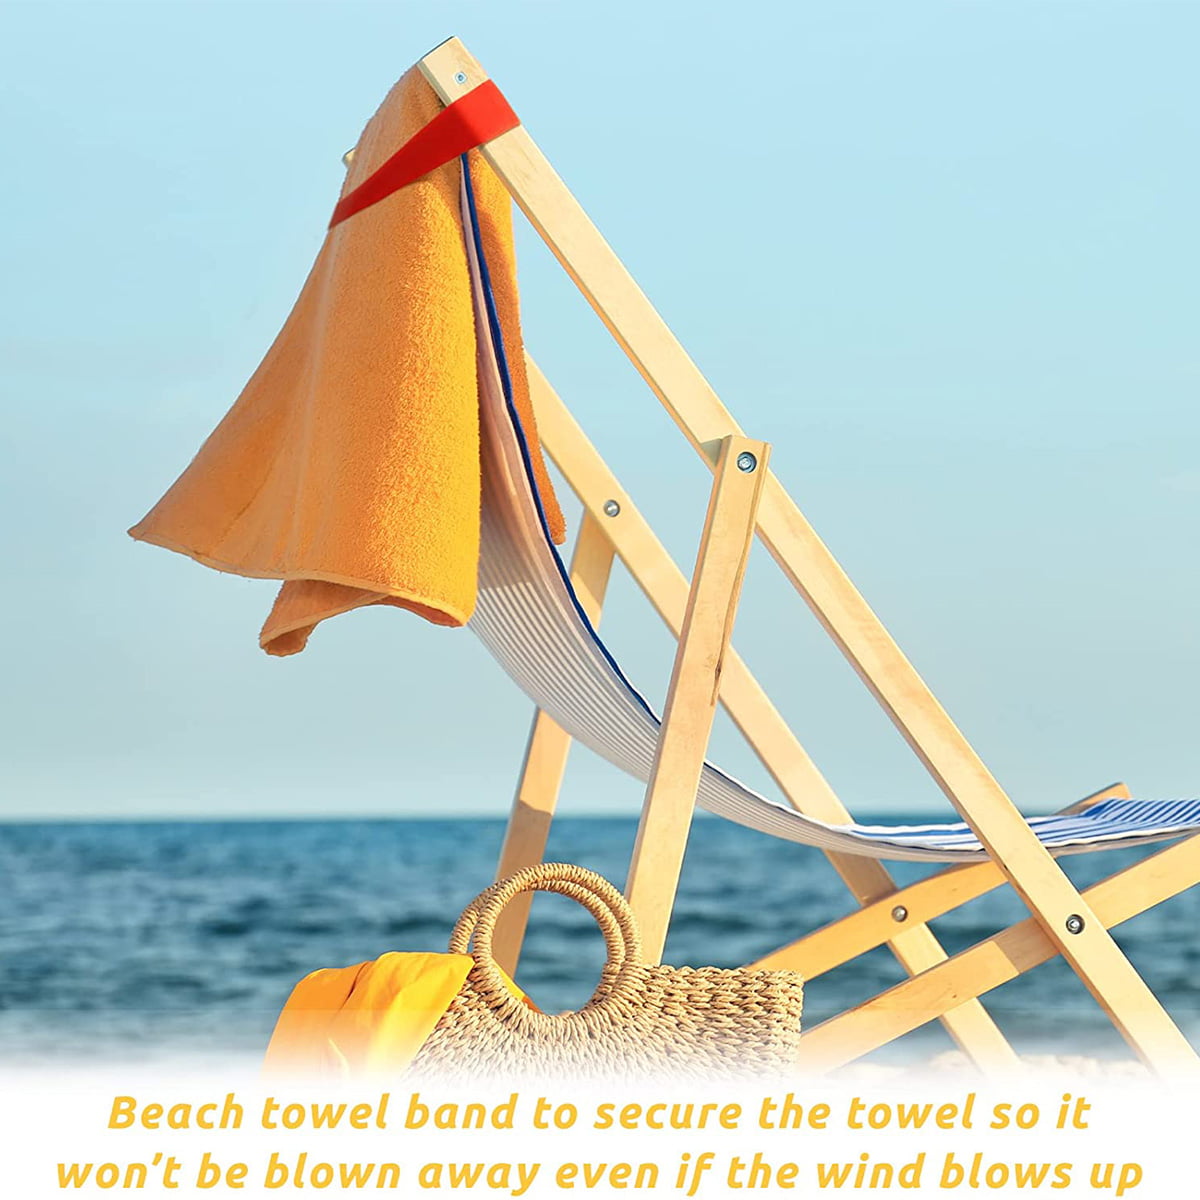 10pcs Beach Chair Towel Bands Elastic Beach Chair Bands for Towel 30x1.8CM 5 Colors Durable Silicone Reusable Beach Towel Holder Clamps for Pool Summer Vacation 